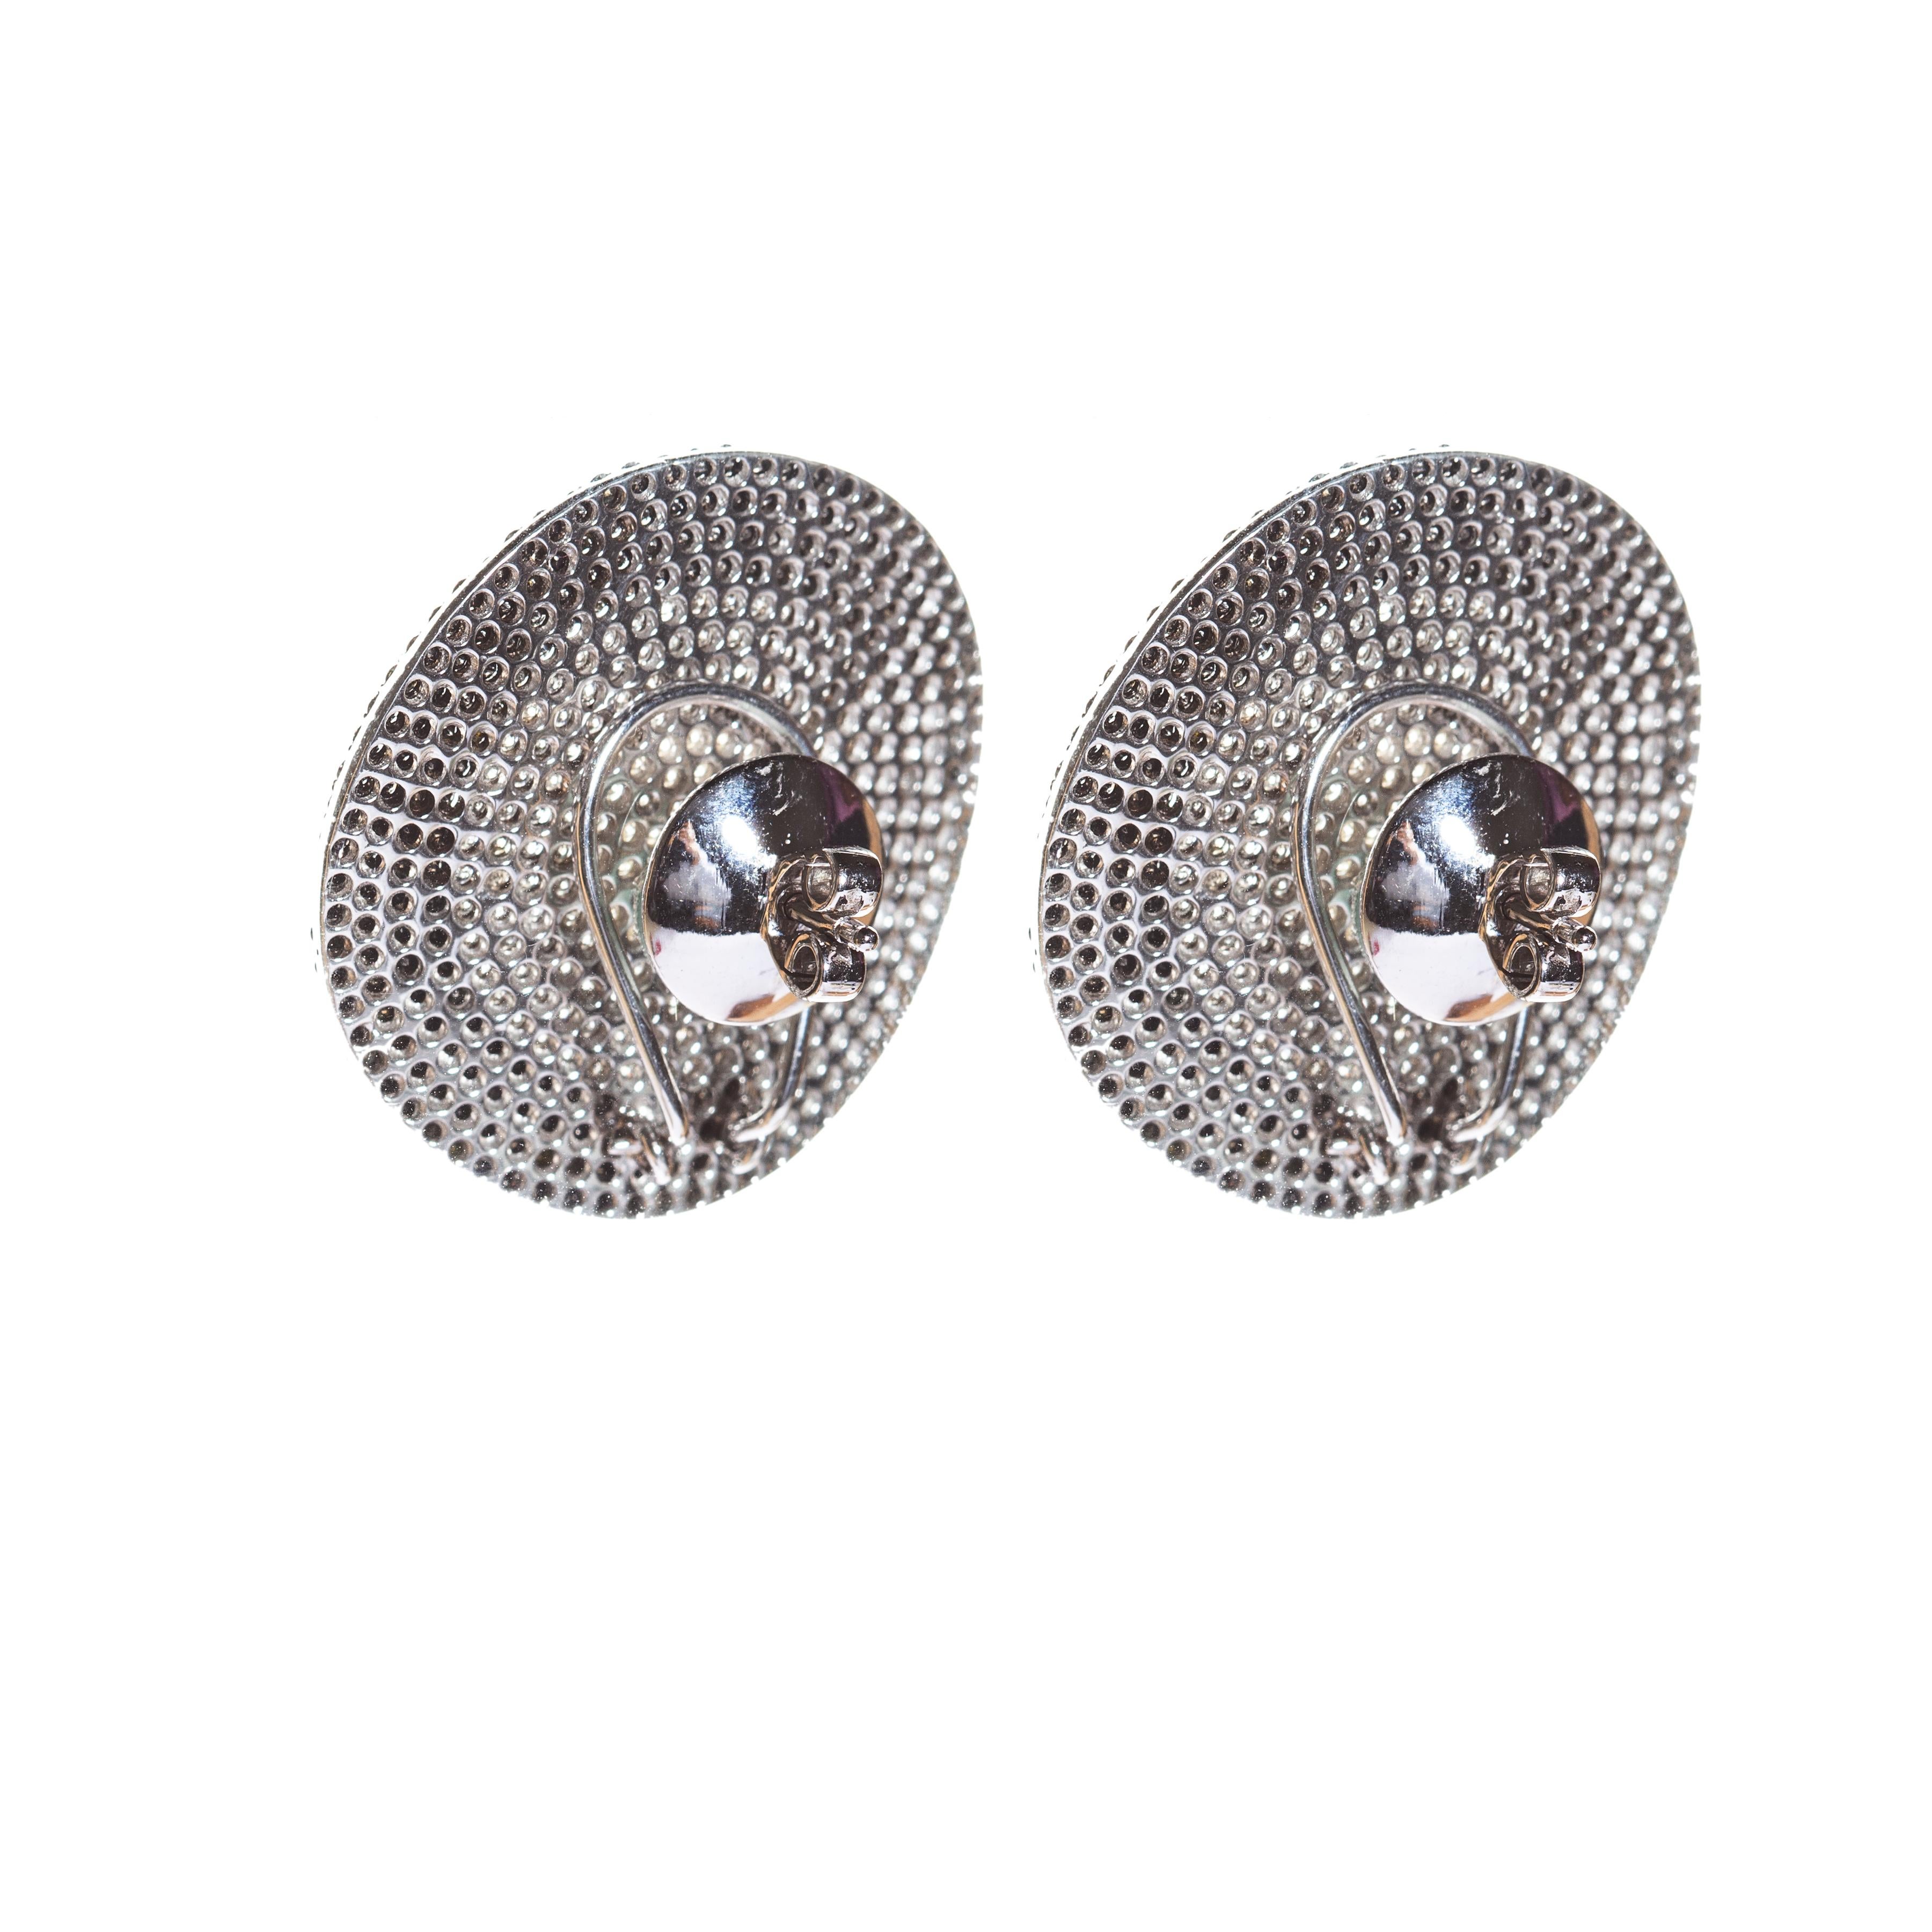 Brilliant Cut Moon Phase Disc Earrings in 18 Karat Gold Set with White Black and Grey Diamonds For Sale